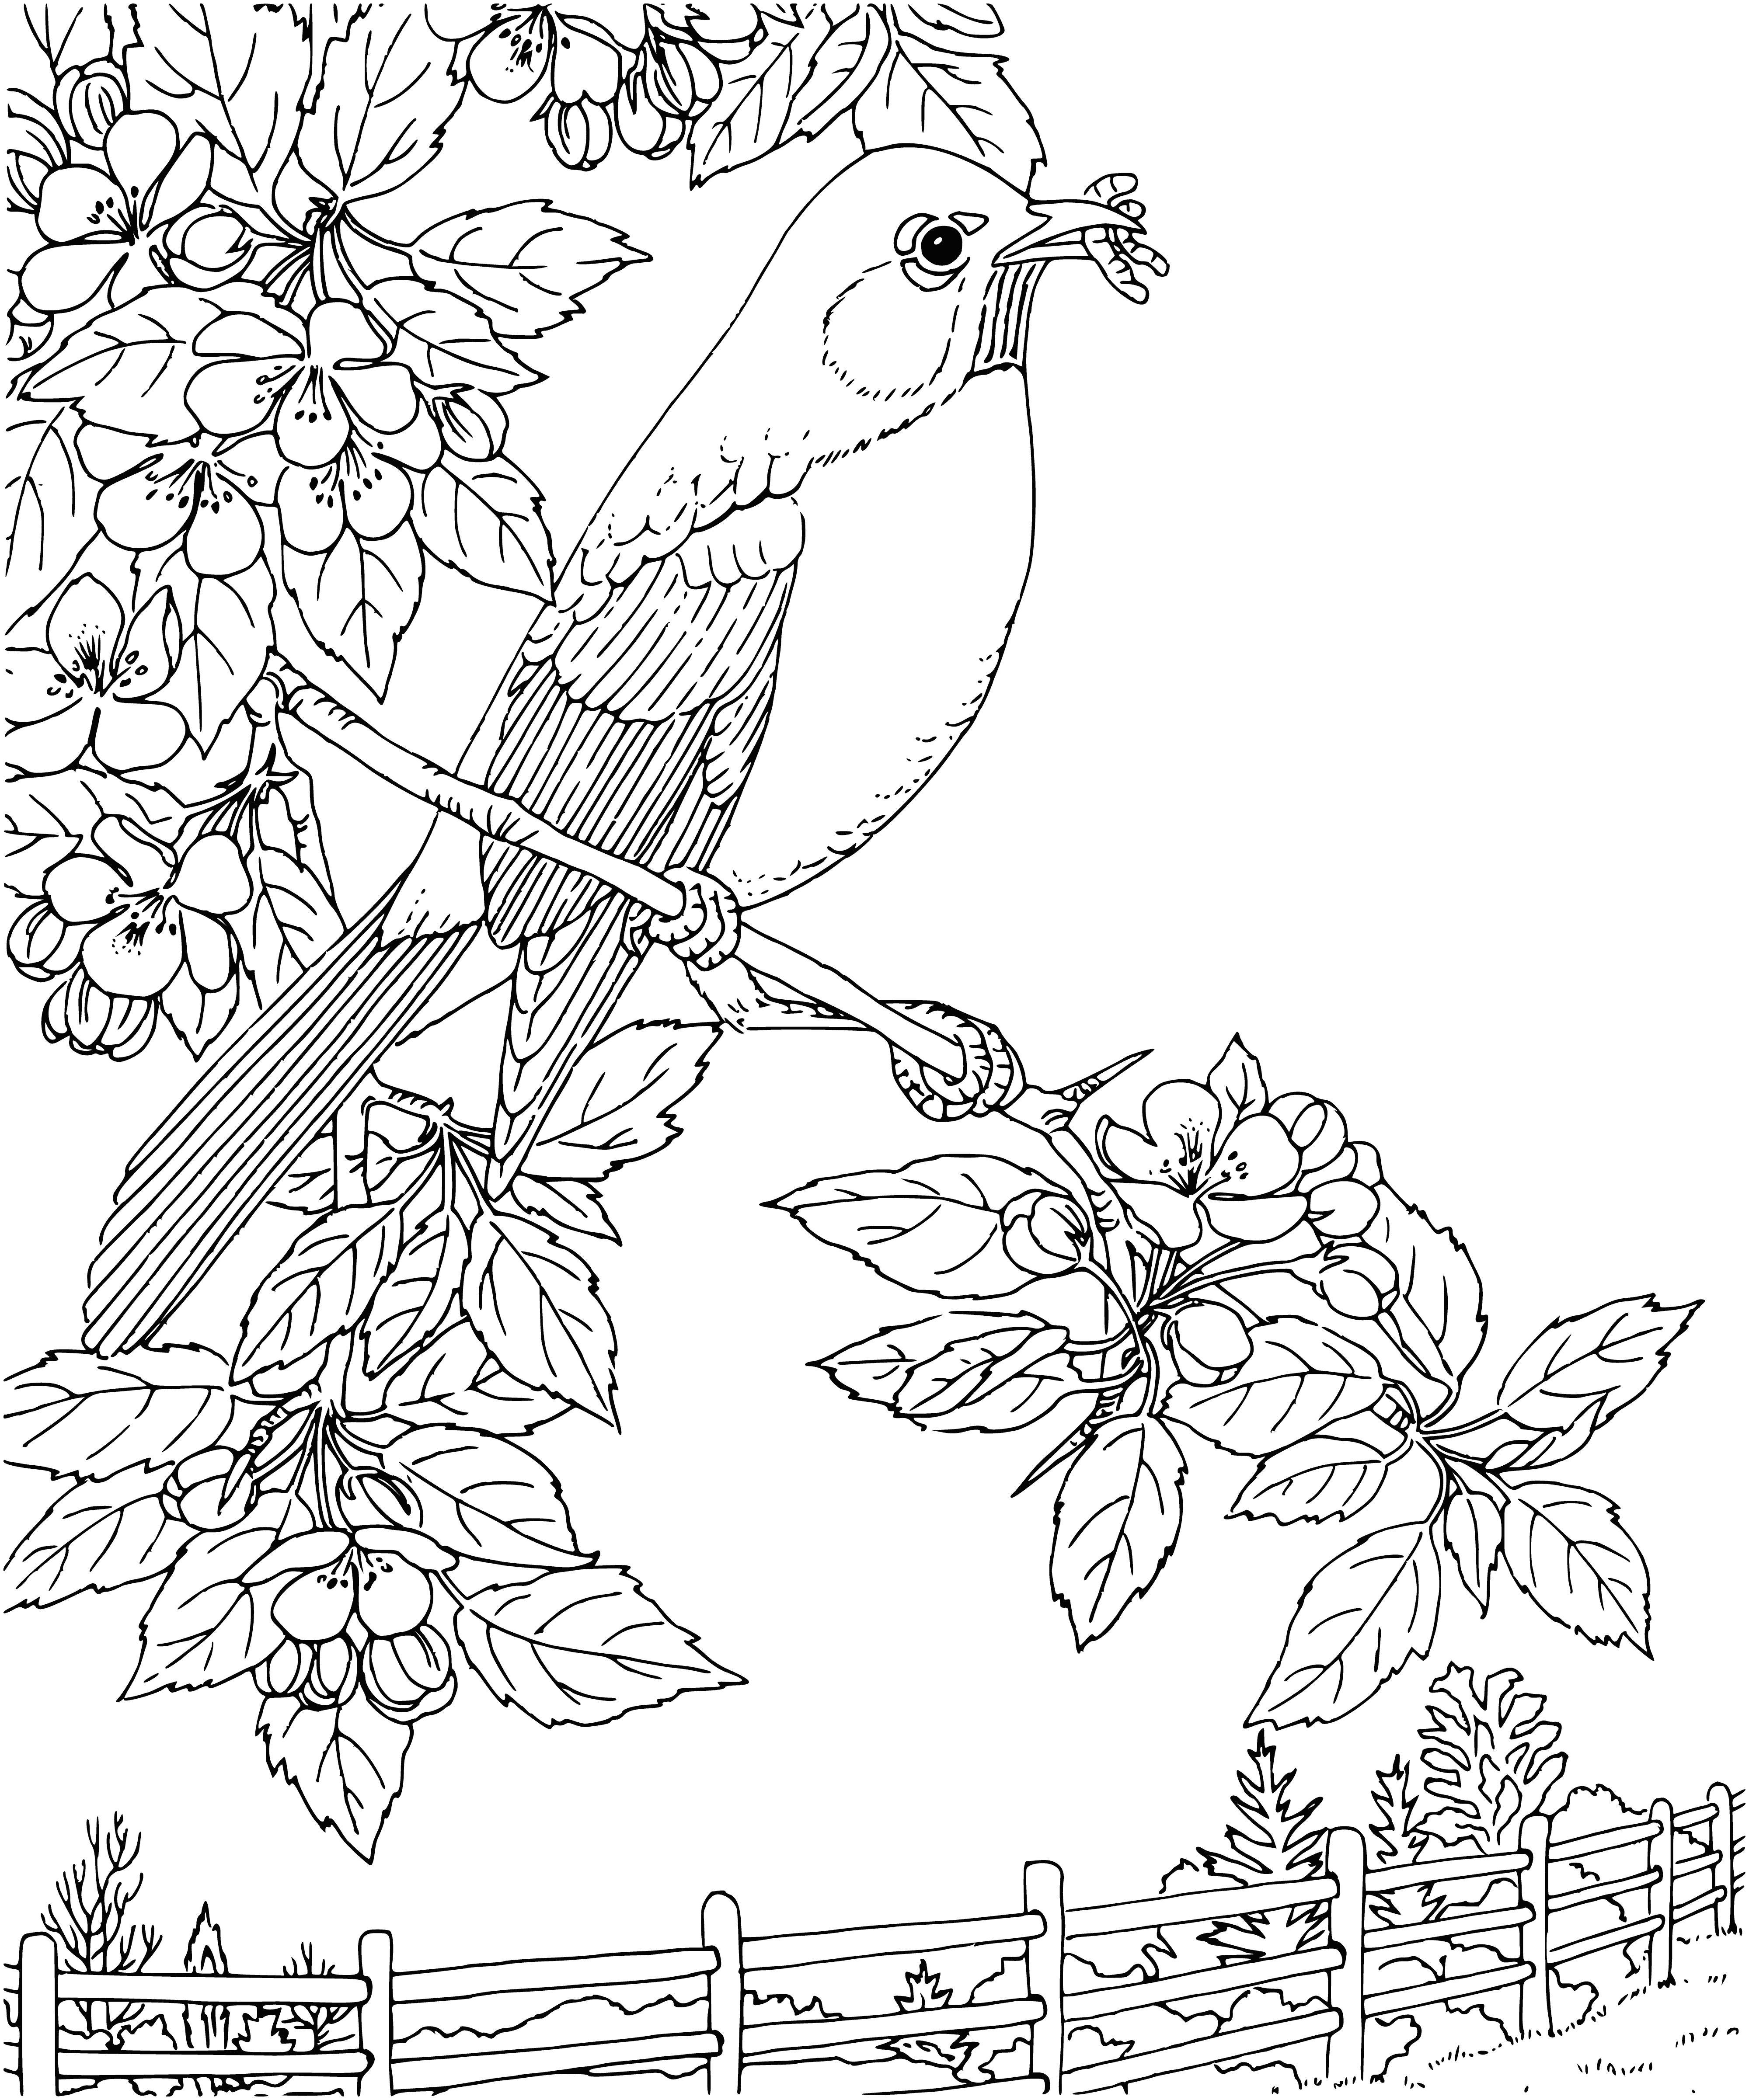 coloring page: Many birds of different colors soar over the village of Malinovka, some in formation, others alone.